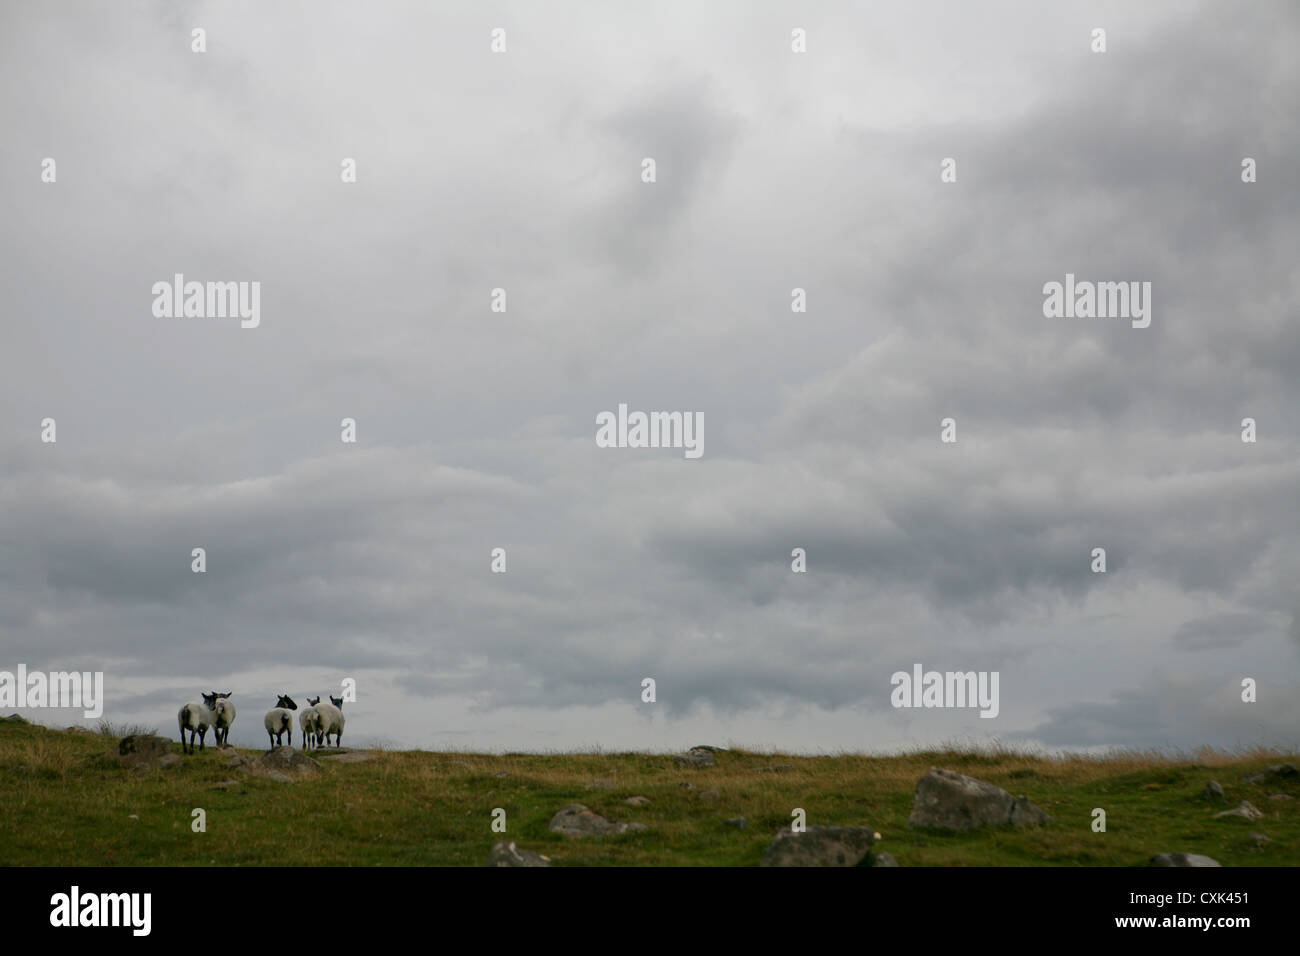 Five Suffolk sheep looking out on the horizon, Dartmoor, cloudy day. Stock Photo